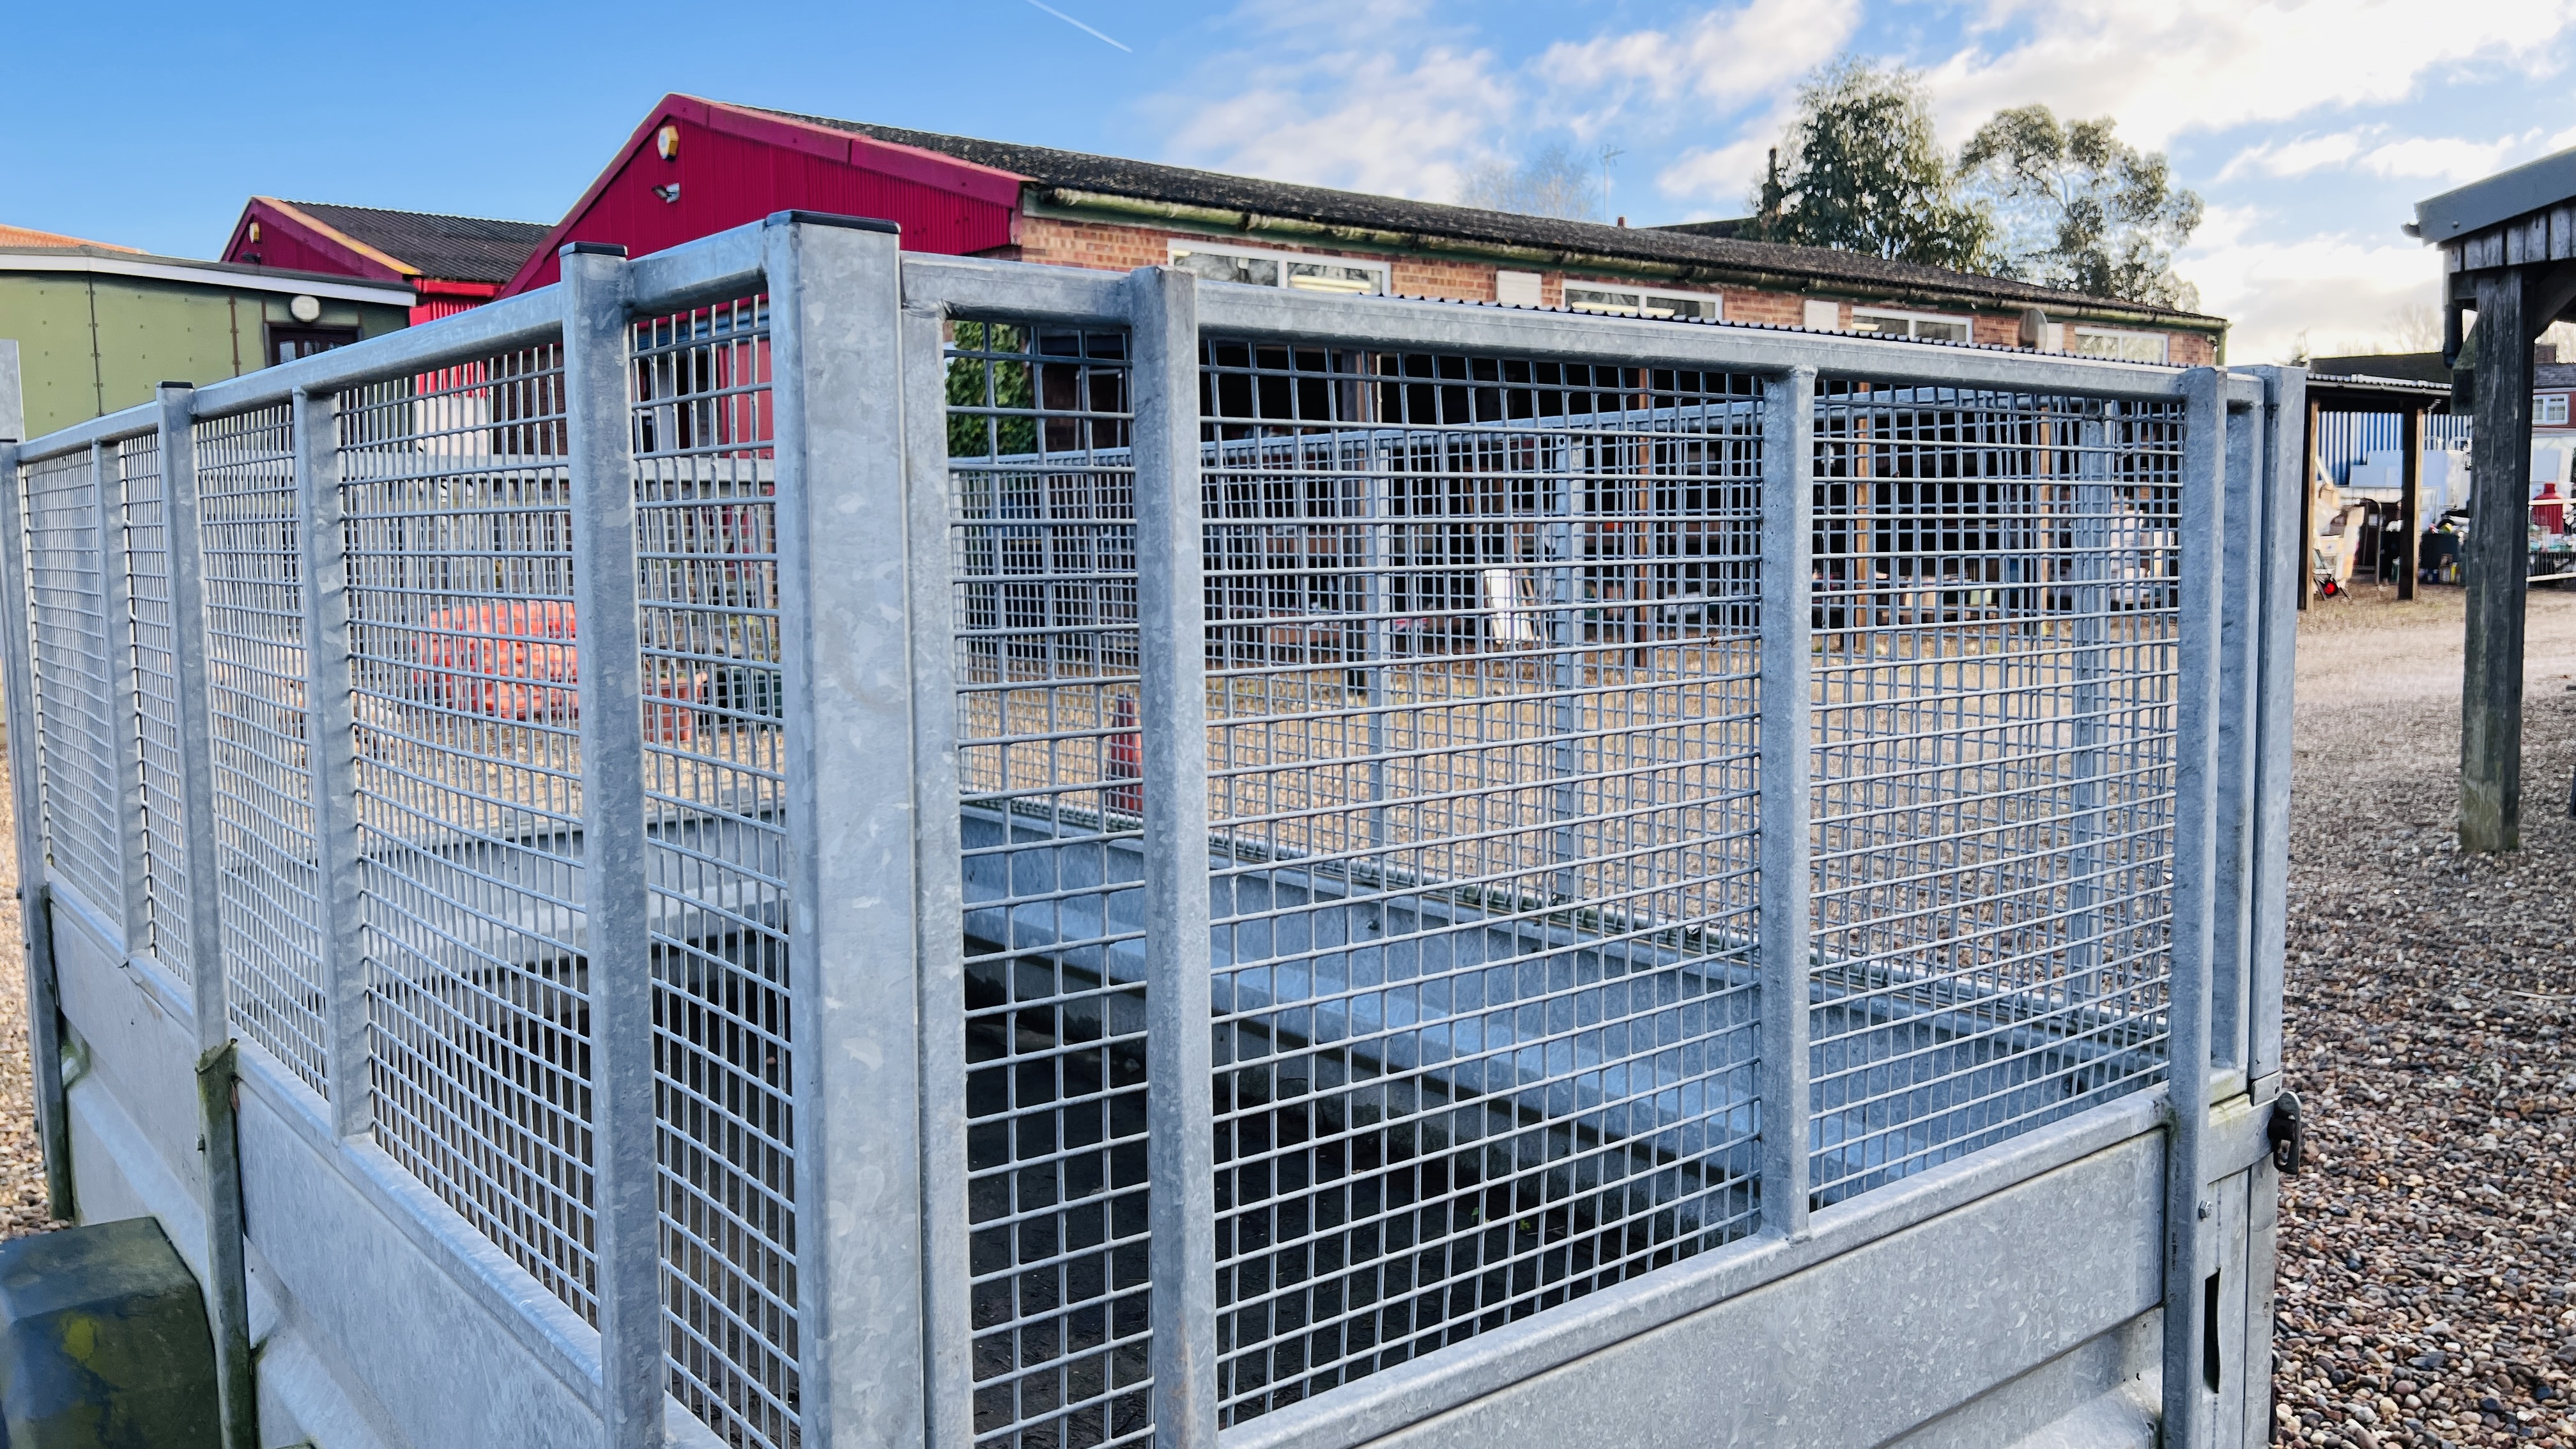 A PAGE TRAILERS TWIN AXLE GALVANISED CAR TRAILER WITH CAGE TOP, 8FT 7INCH X 4FT 7 INCH. - Image 12 of 14